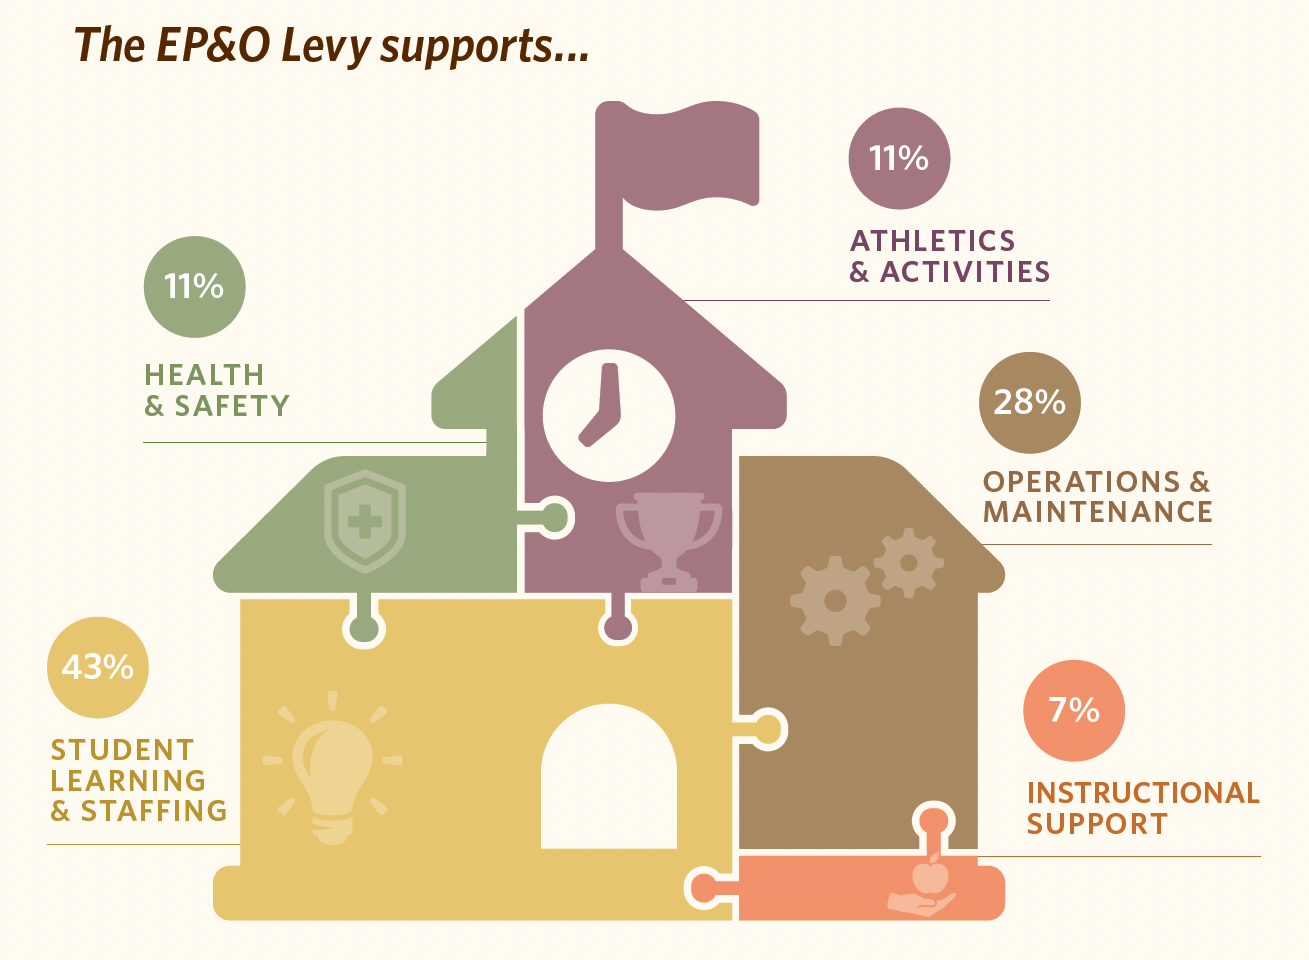 EPO Levy Supports 7% Instructional Support, 43% Student Learning and Staffing, 11% athletics and activities, 28% operations and maintenance, 11% health & safety, on a chart that is shaped like a school house with clock, trophy, flag, and book, light bulb, heart, and sprocket icons for each area